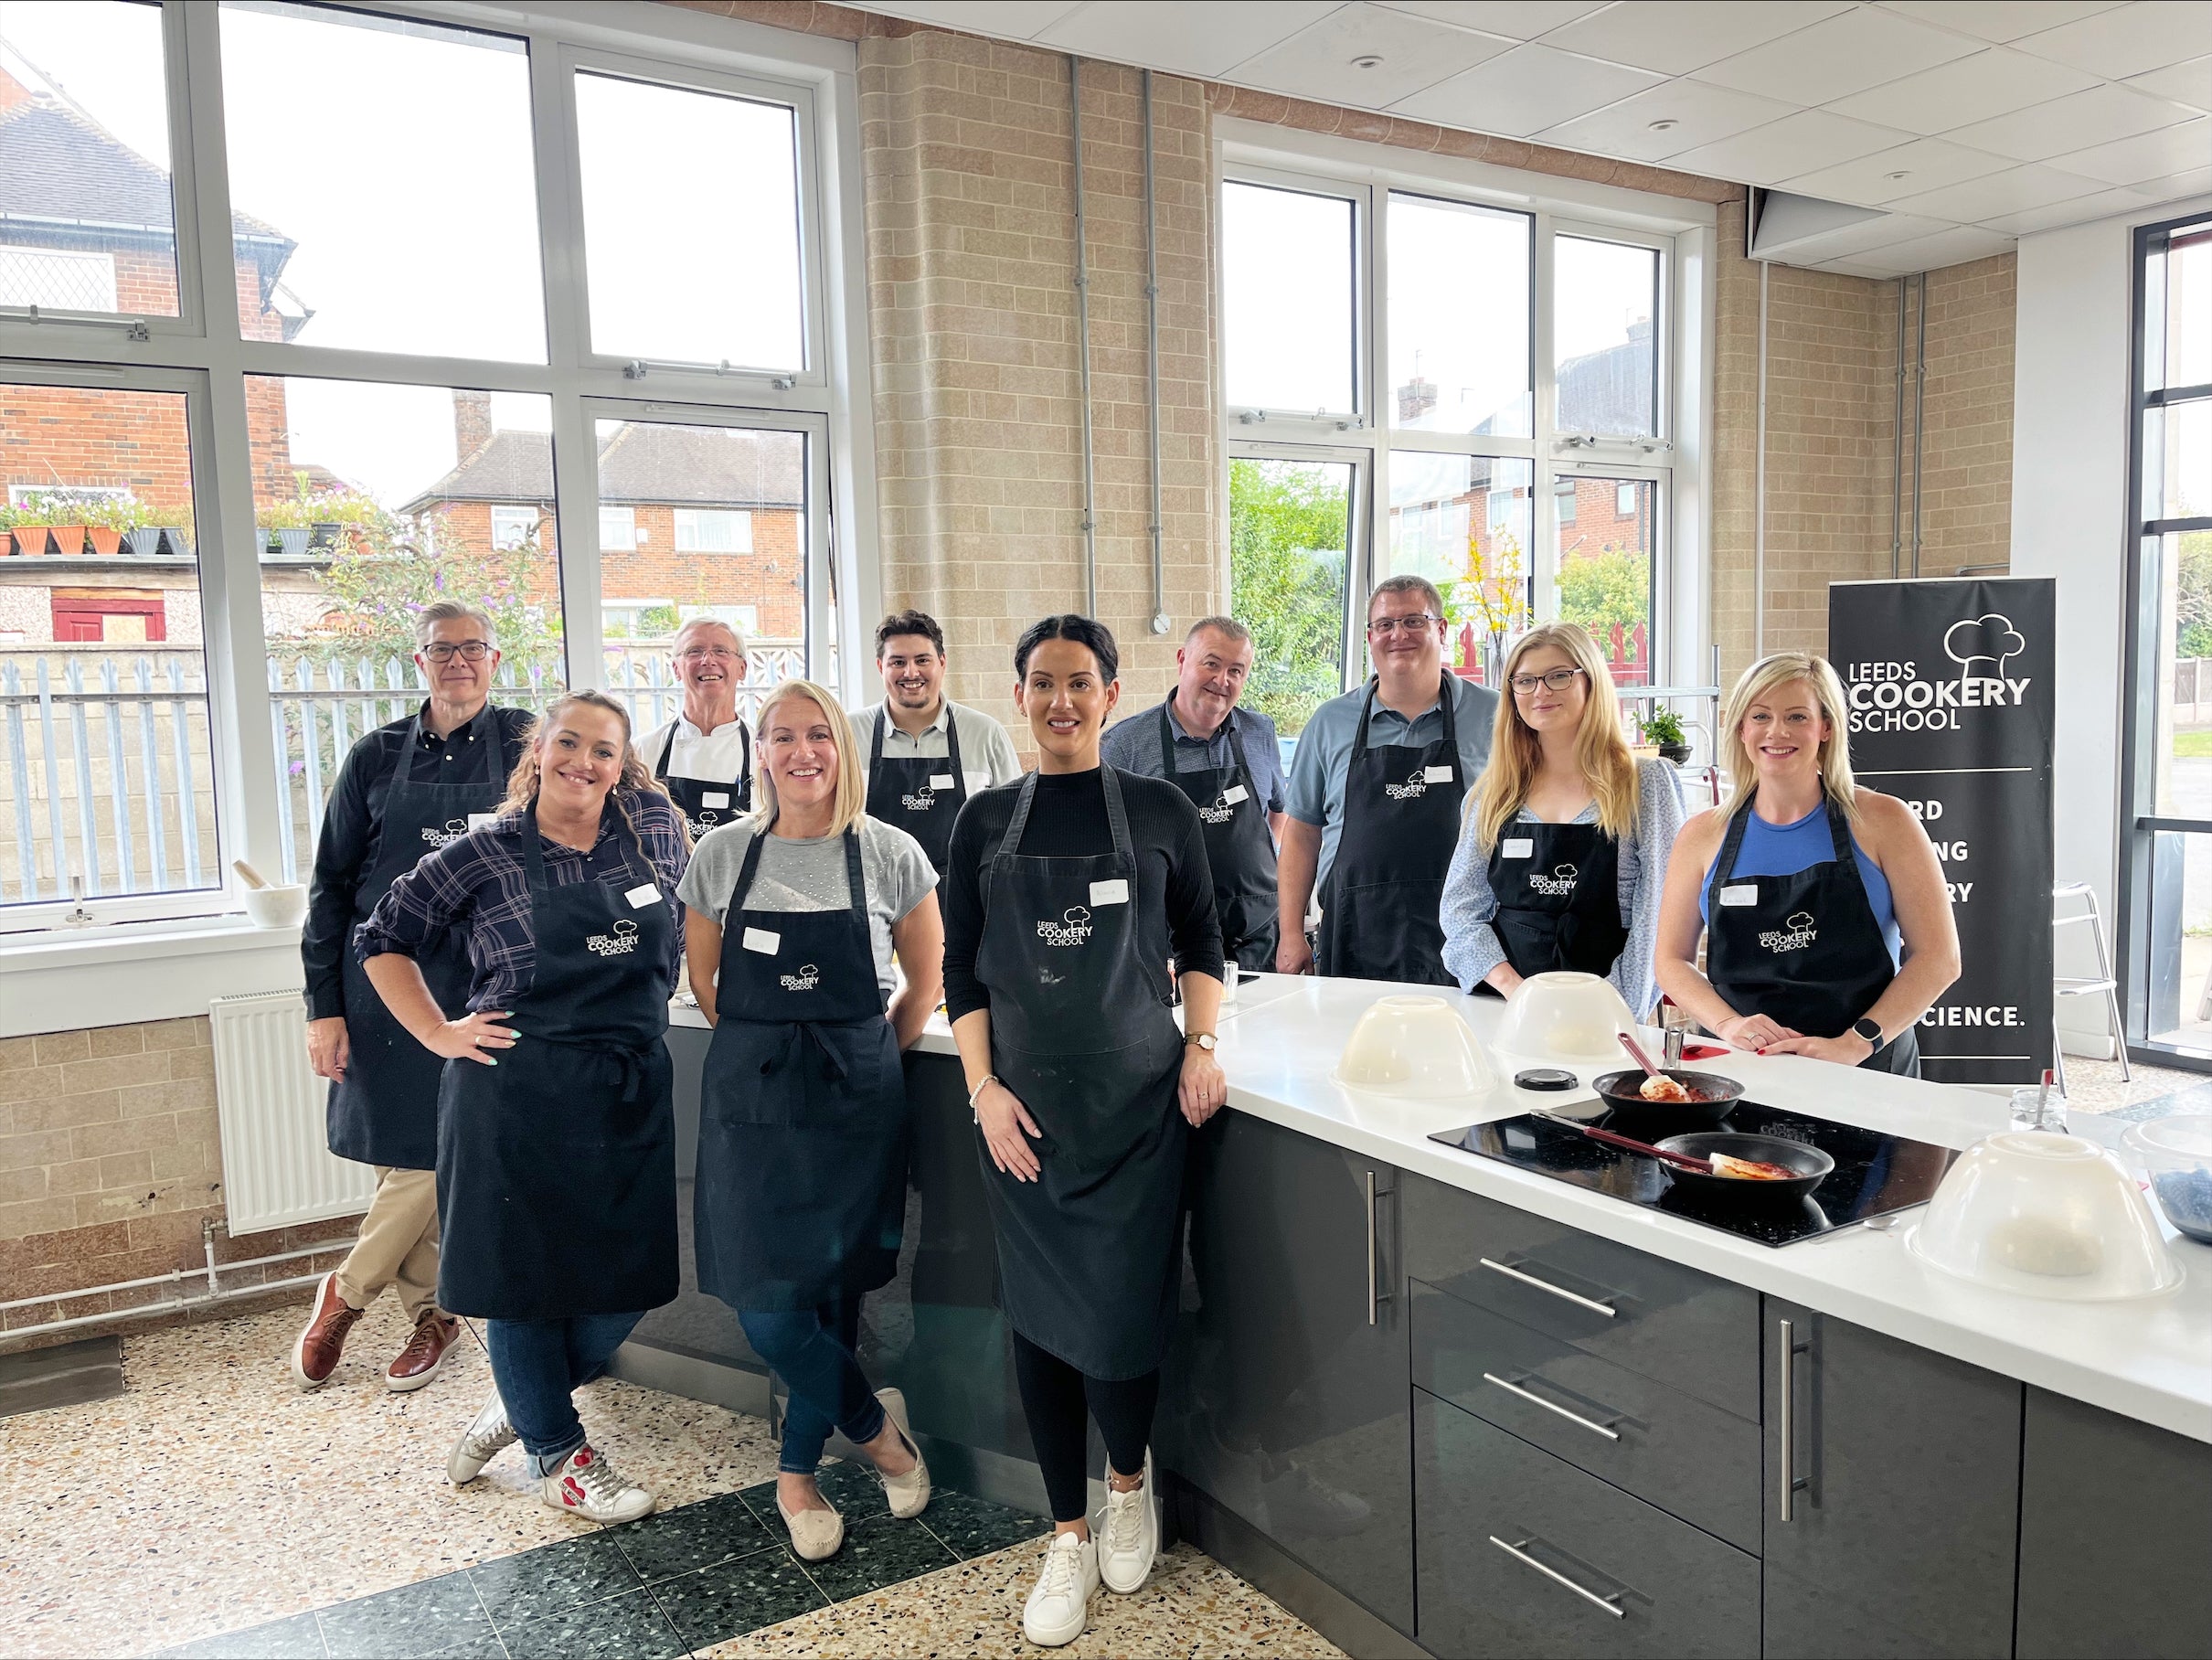 Plan your team building event at Leeds Cookery School